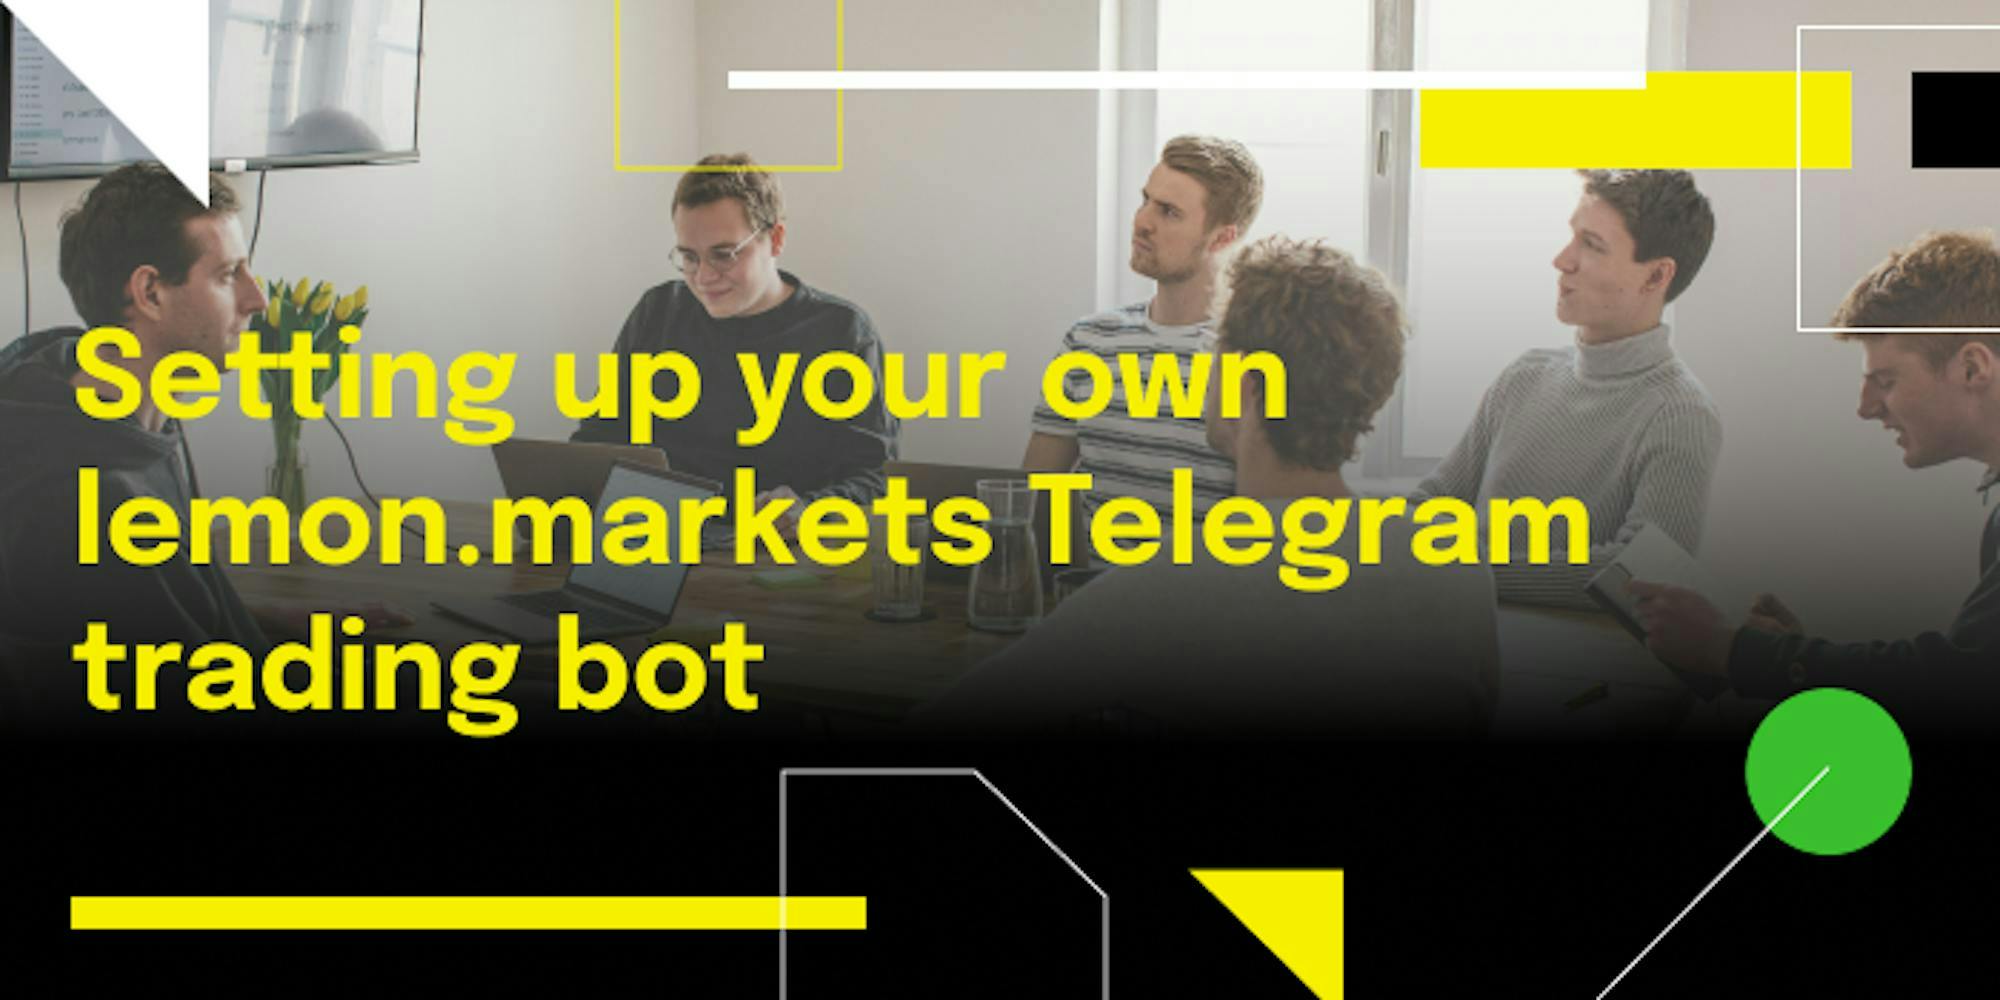 Title Card for the Article "Setting up your own lemon.markets Telegram trading bot"